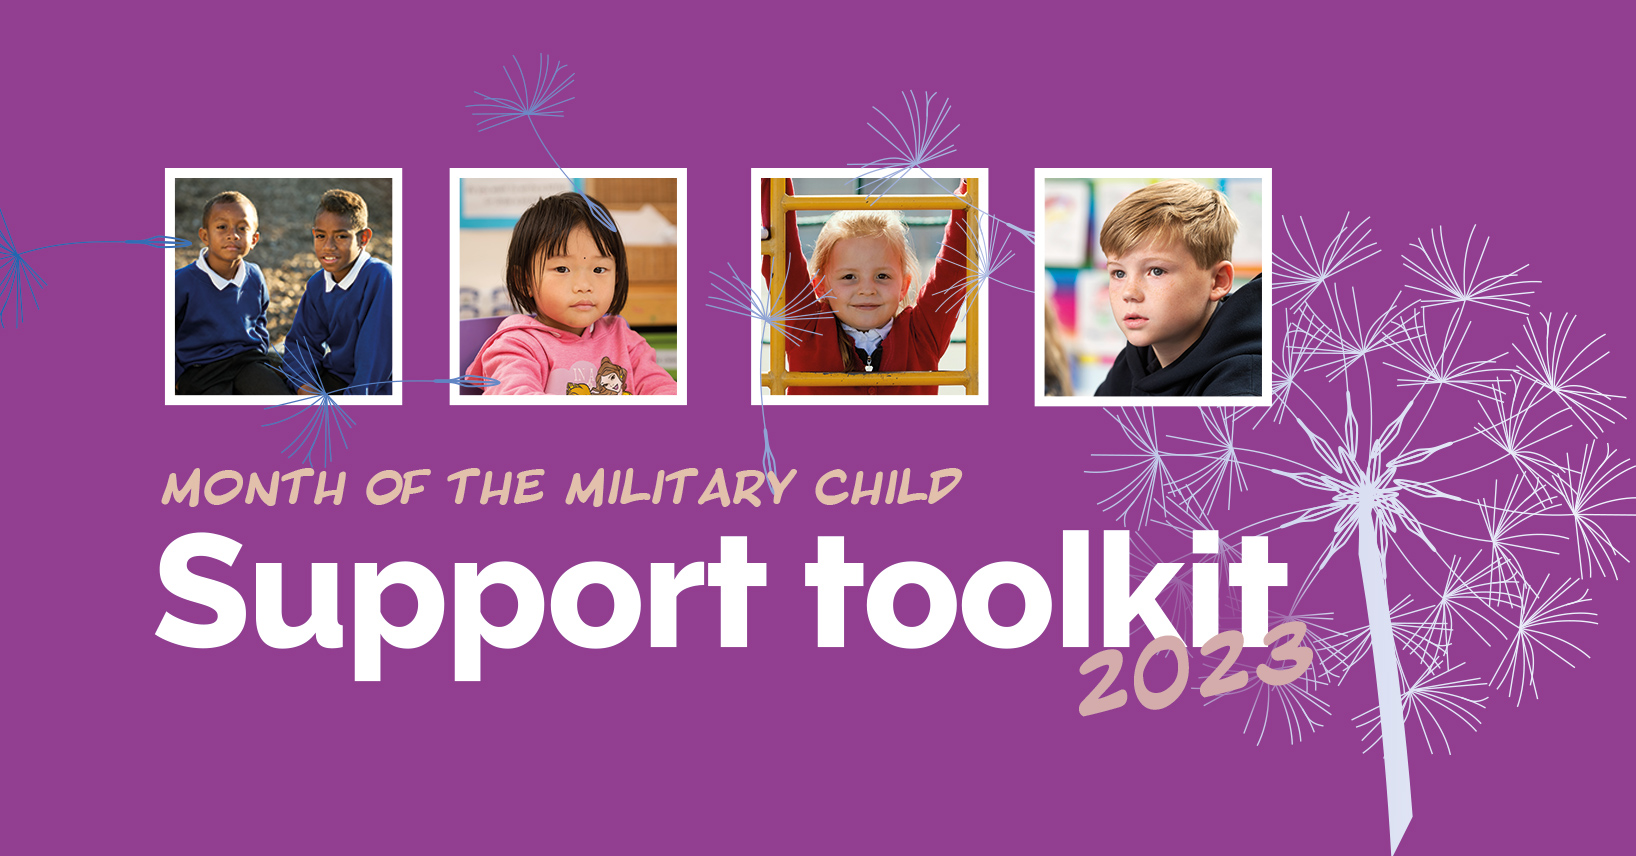 Four pictures of children sit above the text 'Month of the Military Child - Support toolkit 2023